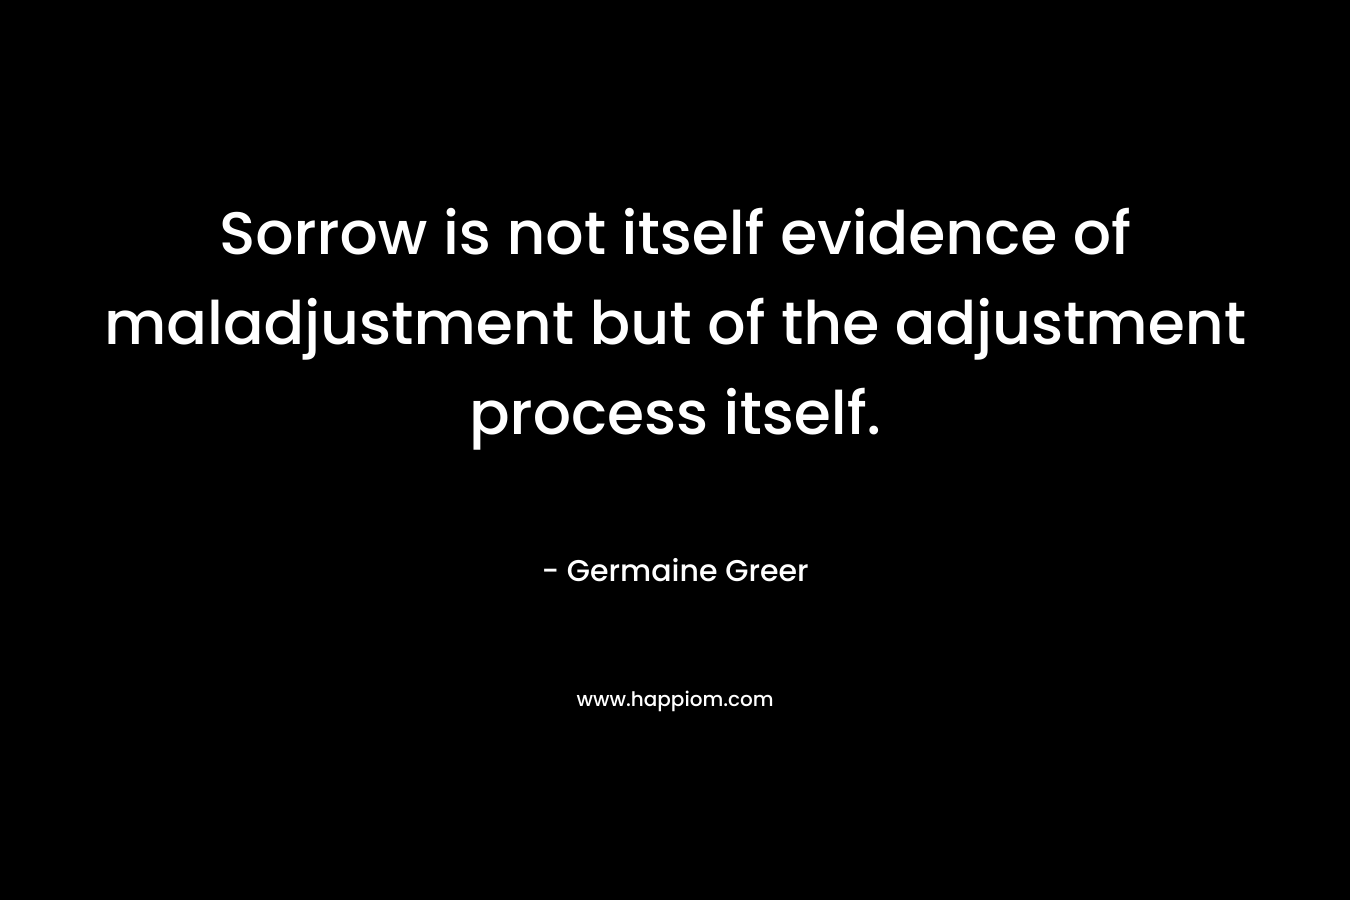 Sorrow is not itself evidence of maladjustment but of the adjustment process itself.